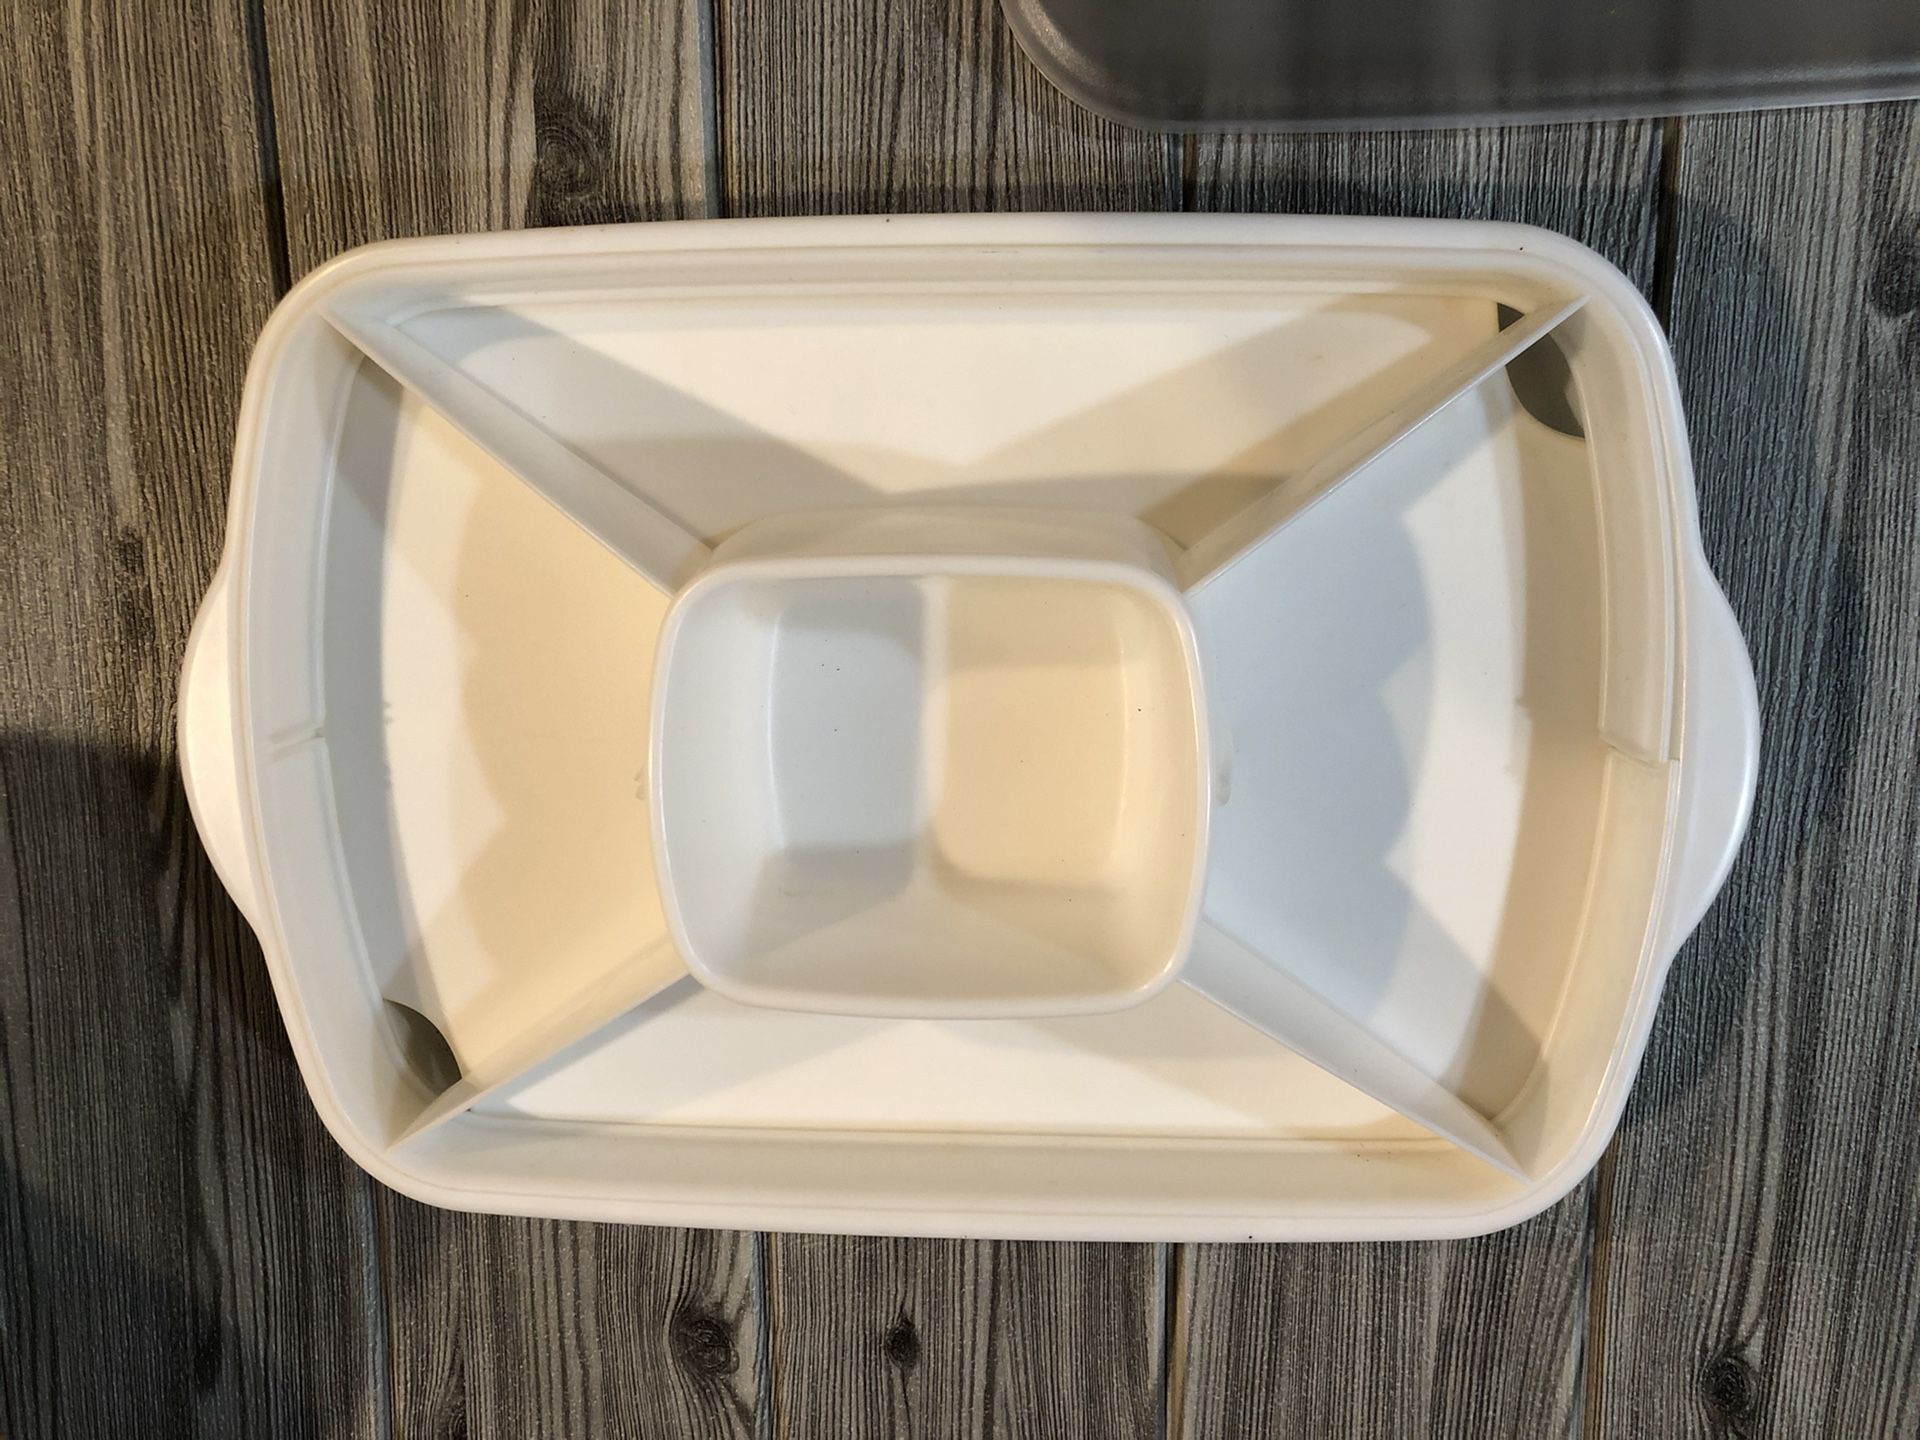 Pampered chef chill deviled egg veggie platter dish with ice pack and lid